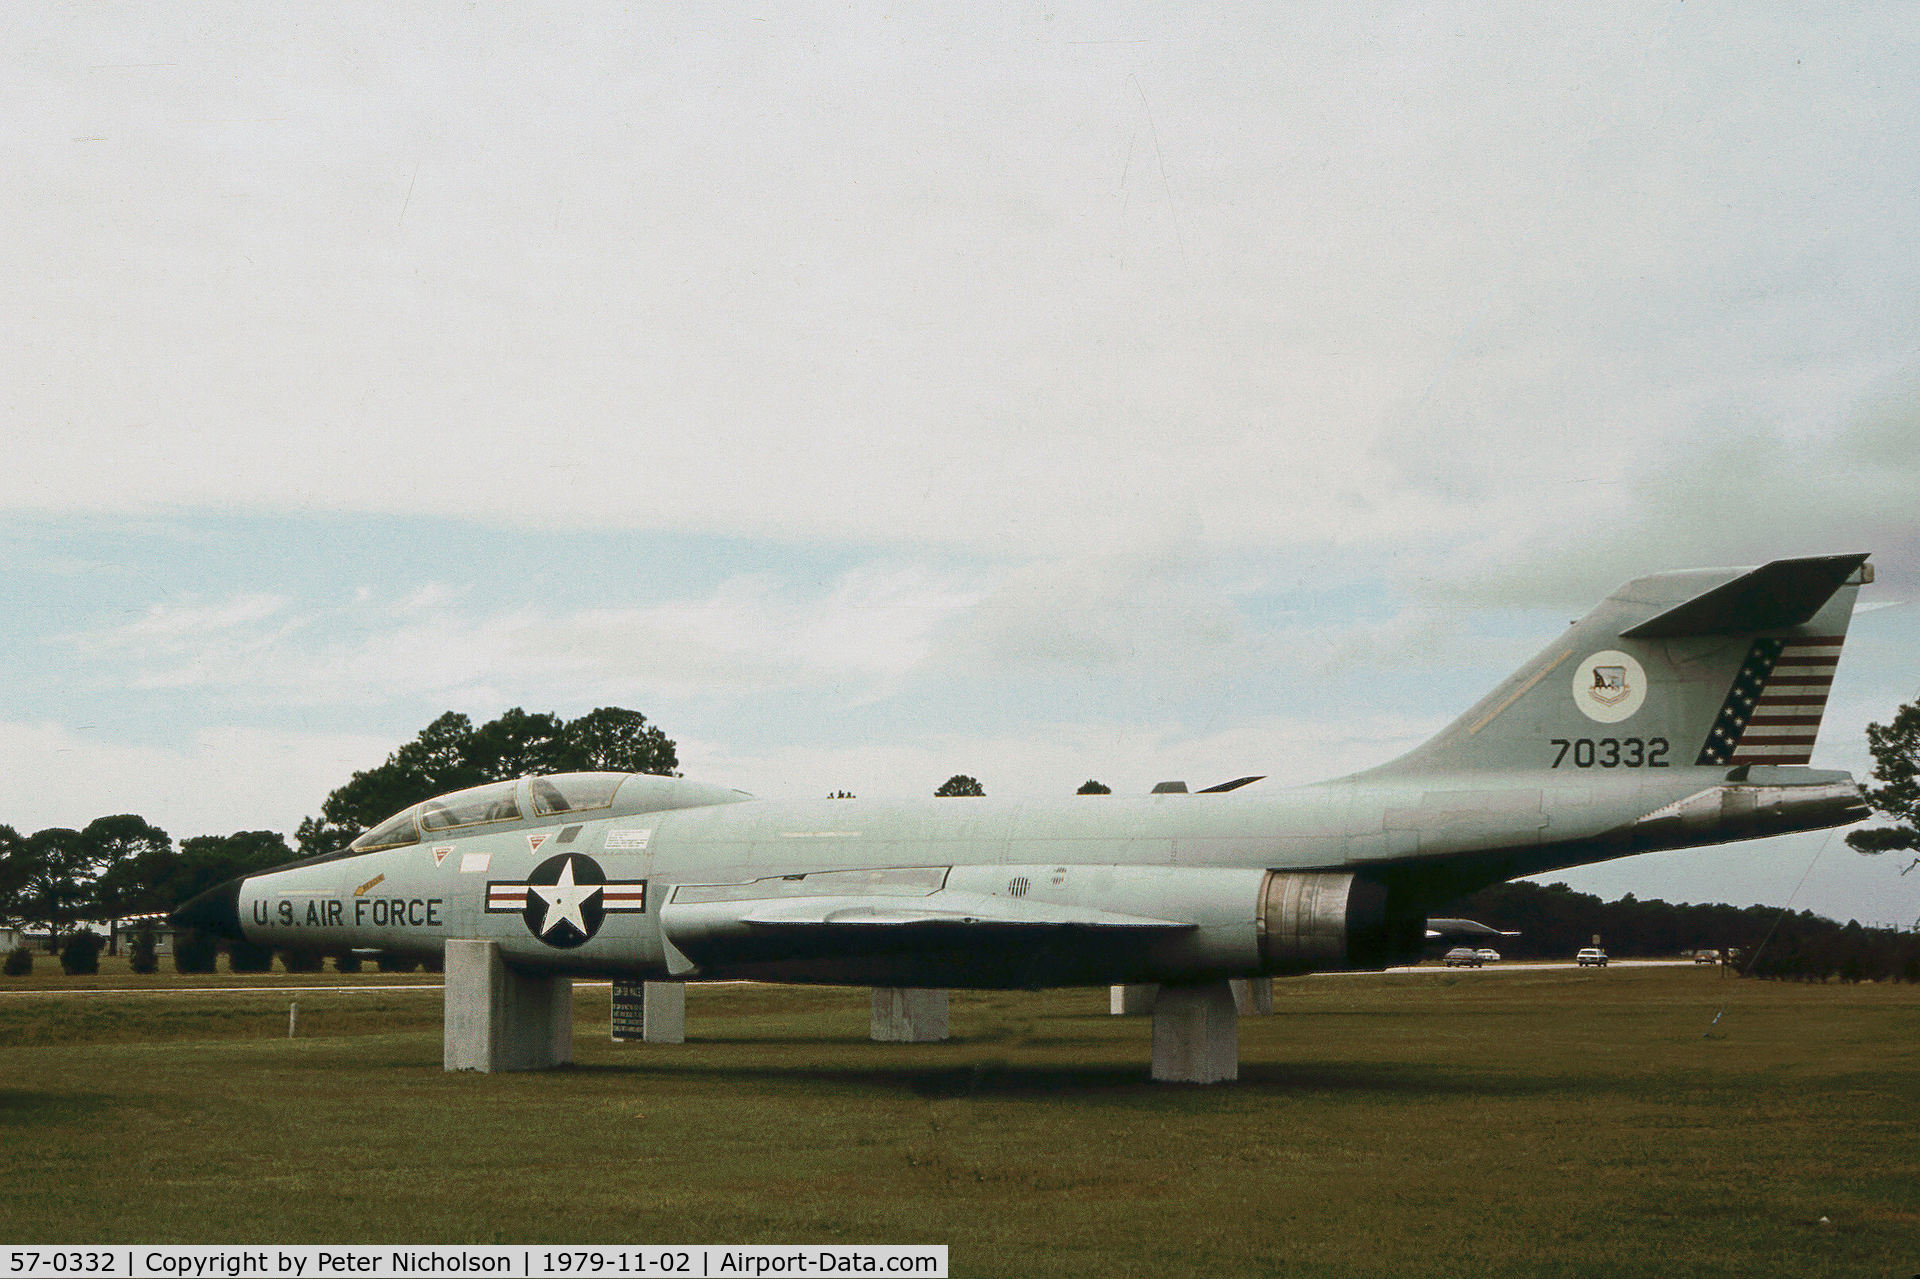 57-0332, 1957 McDonnell F-101F Voodoo C/N 510, F-101F Voodoo on display at the Tyndall Air Park in Panama City, Florida in November 1979.